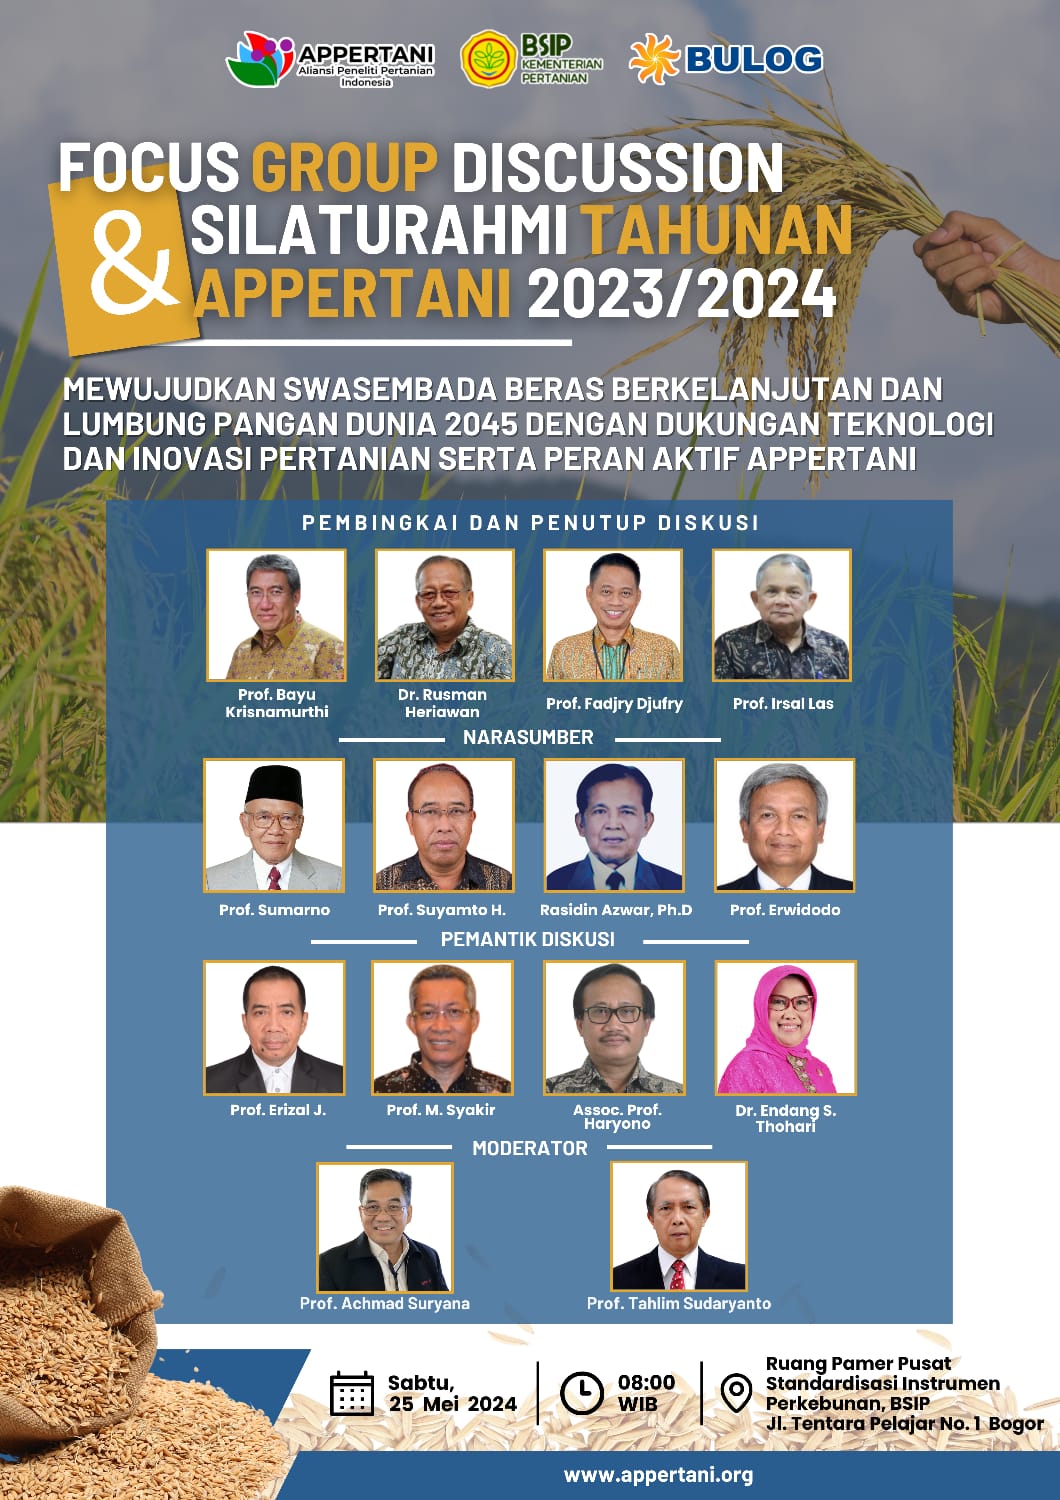 APPERTANI FOCUS GROUP DISCUSSION AND ANNUAL GATHERING 2023/2024